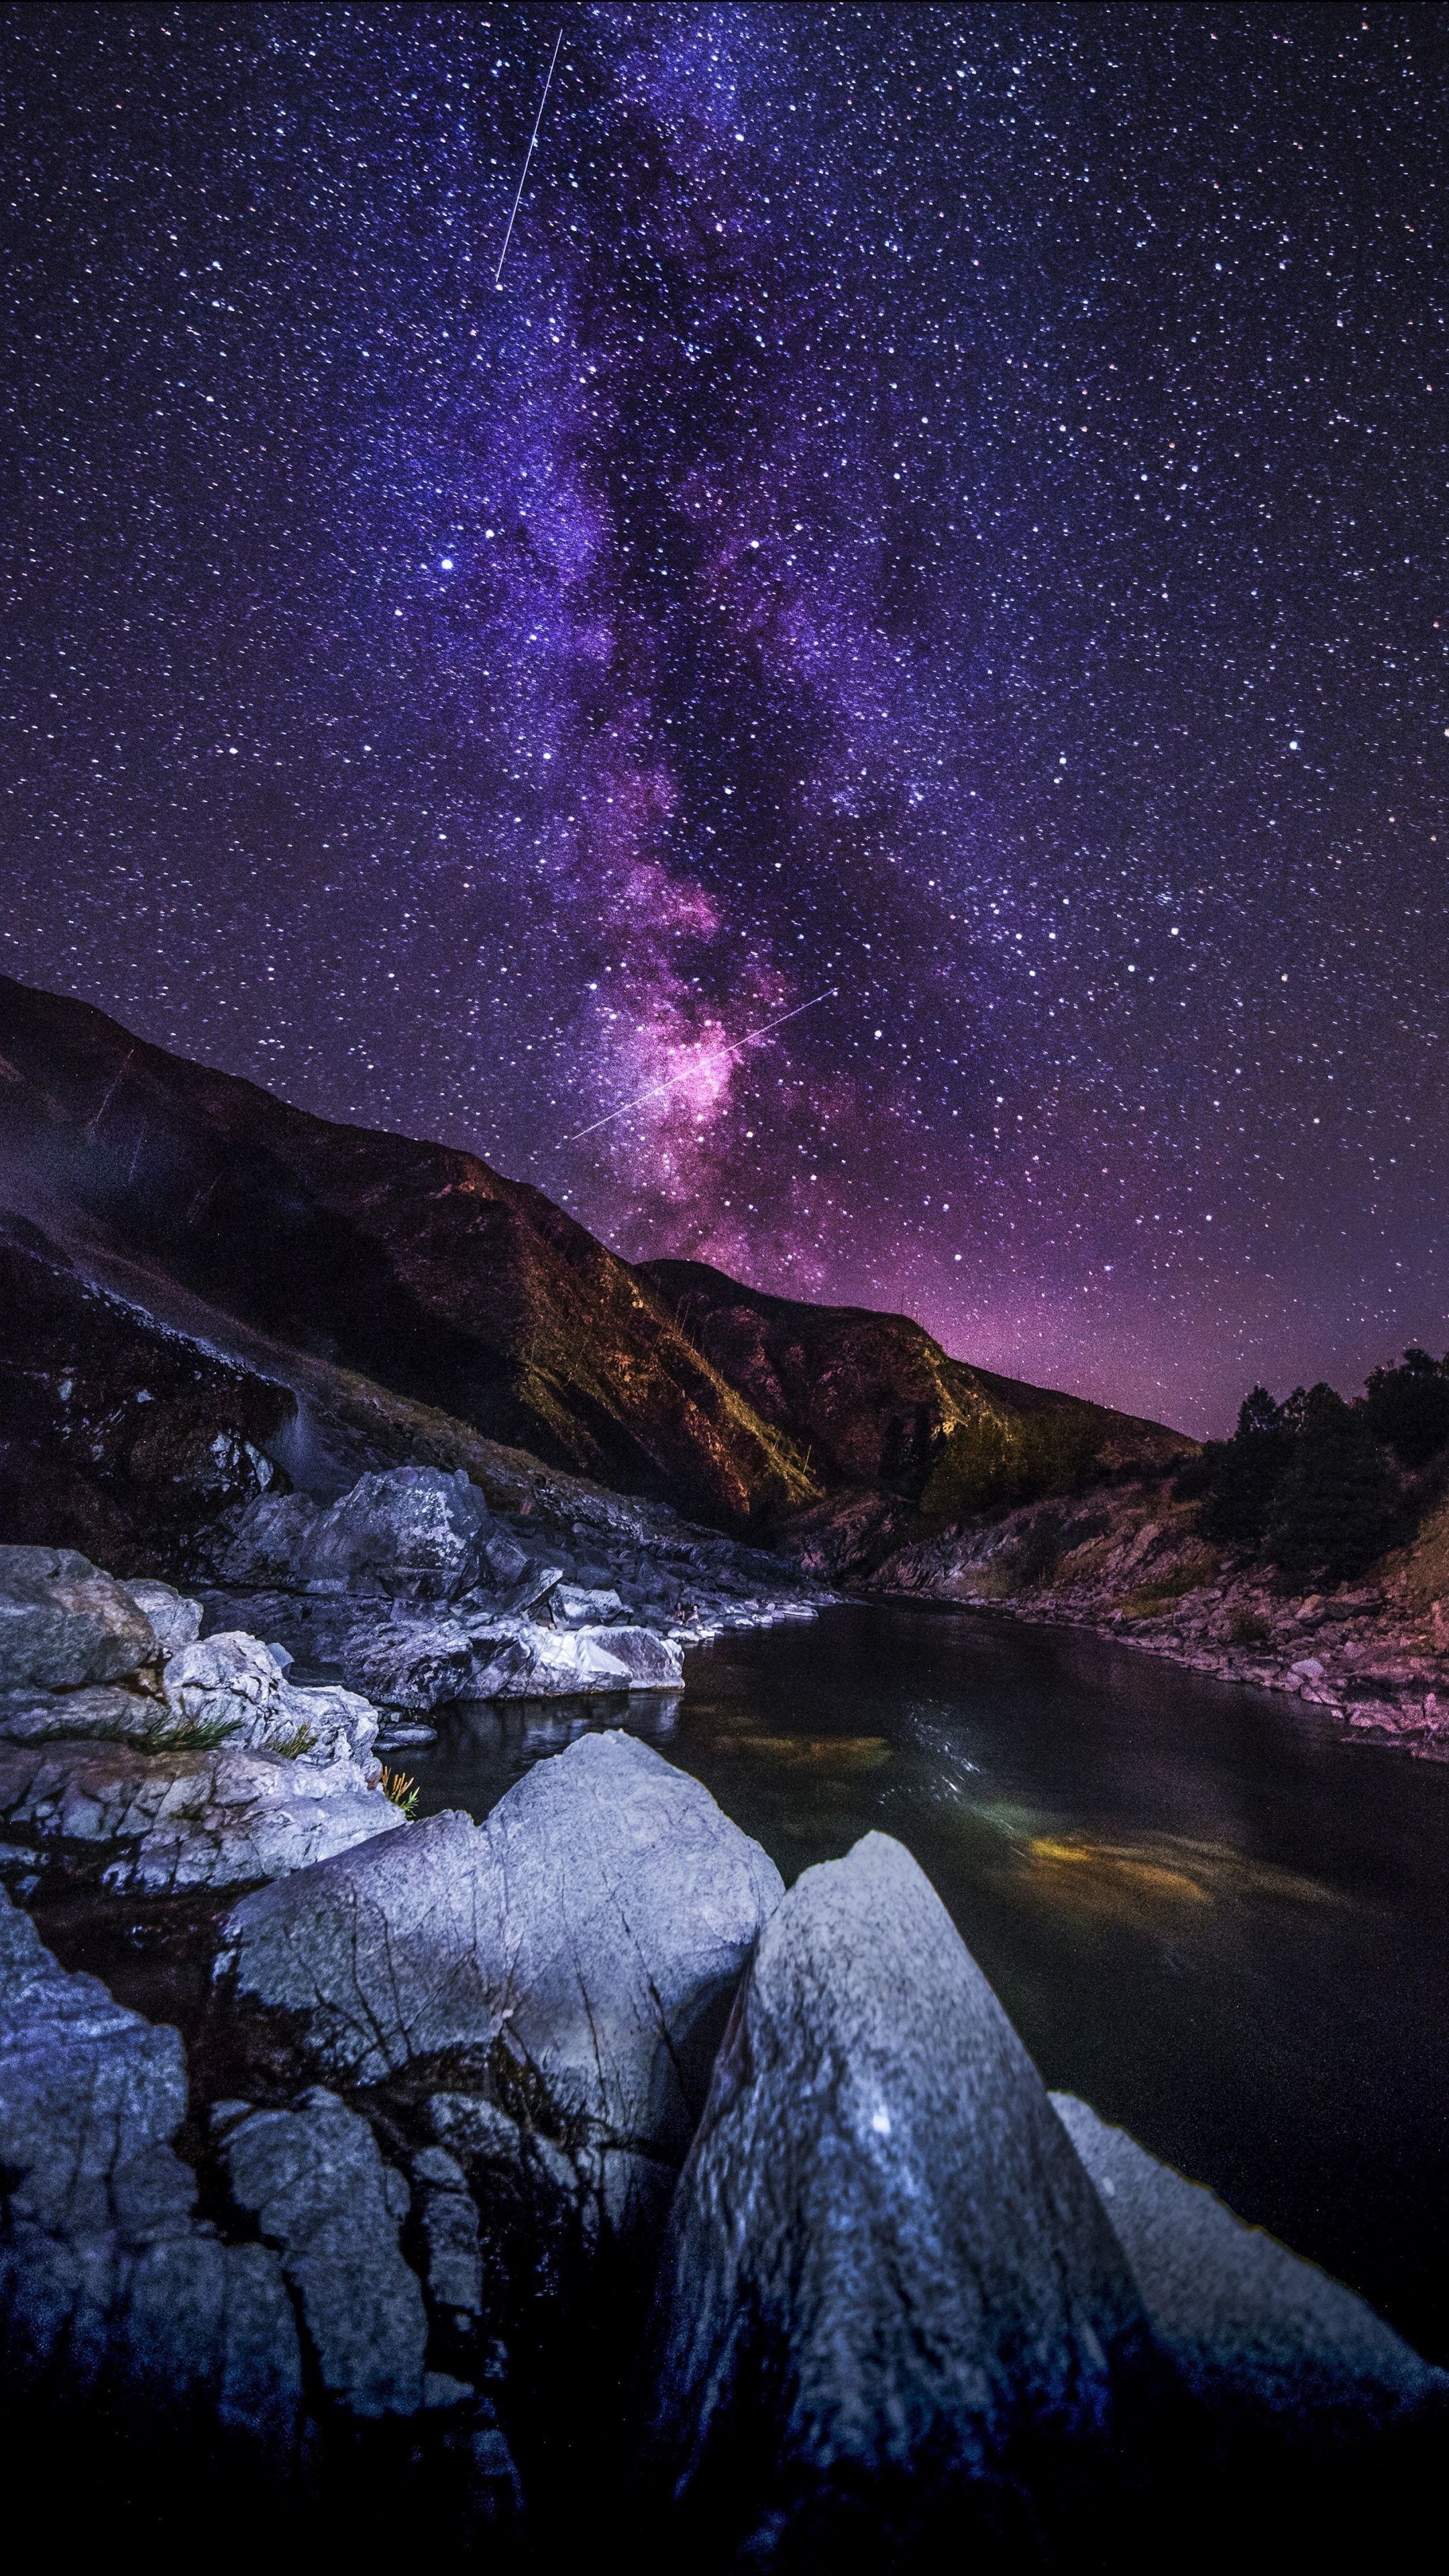 Starry sky, mountains, river, night wallpaper. iPhone wallpaper sky, Night skies, Wallpaper background